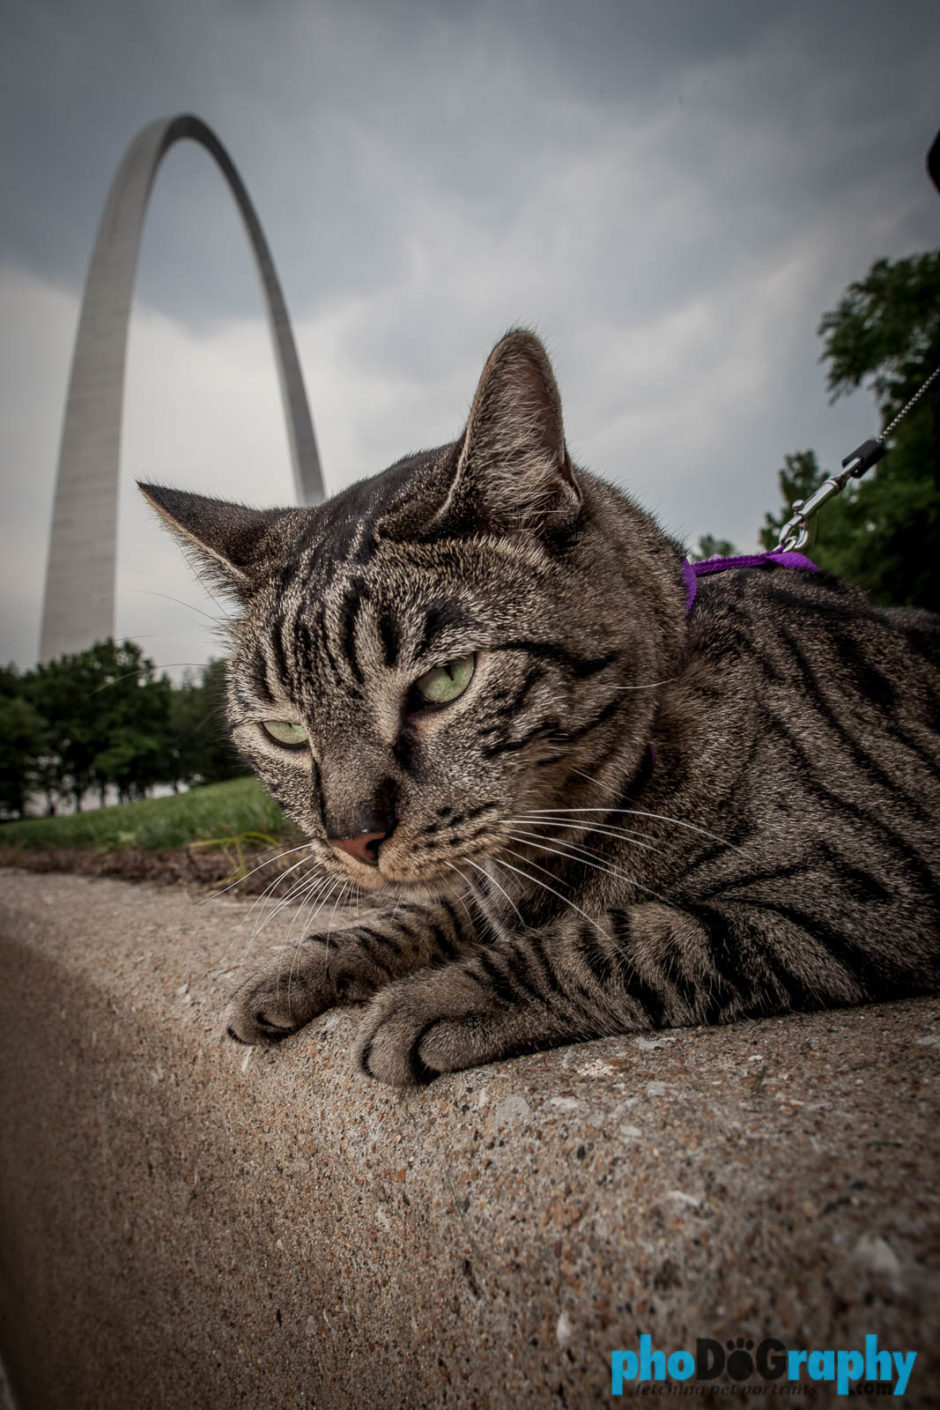 Cats, Gateway Arch, MO, Missouri, Saint Louis, St. Louis, St. Louis MO, The Gateway to the West, Tourism, Travel, Traveling with a cat, U.S., USA, United States, animals, leashed cat, on a leash, phoDOGraphy, traveling cat, traveling with cats